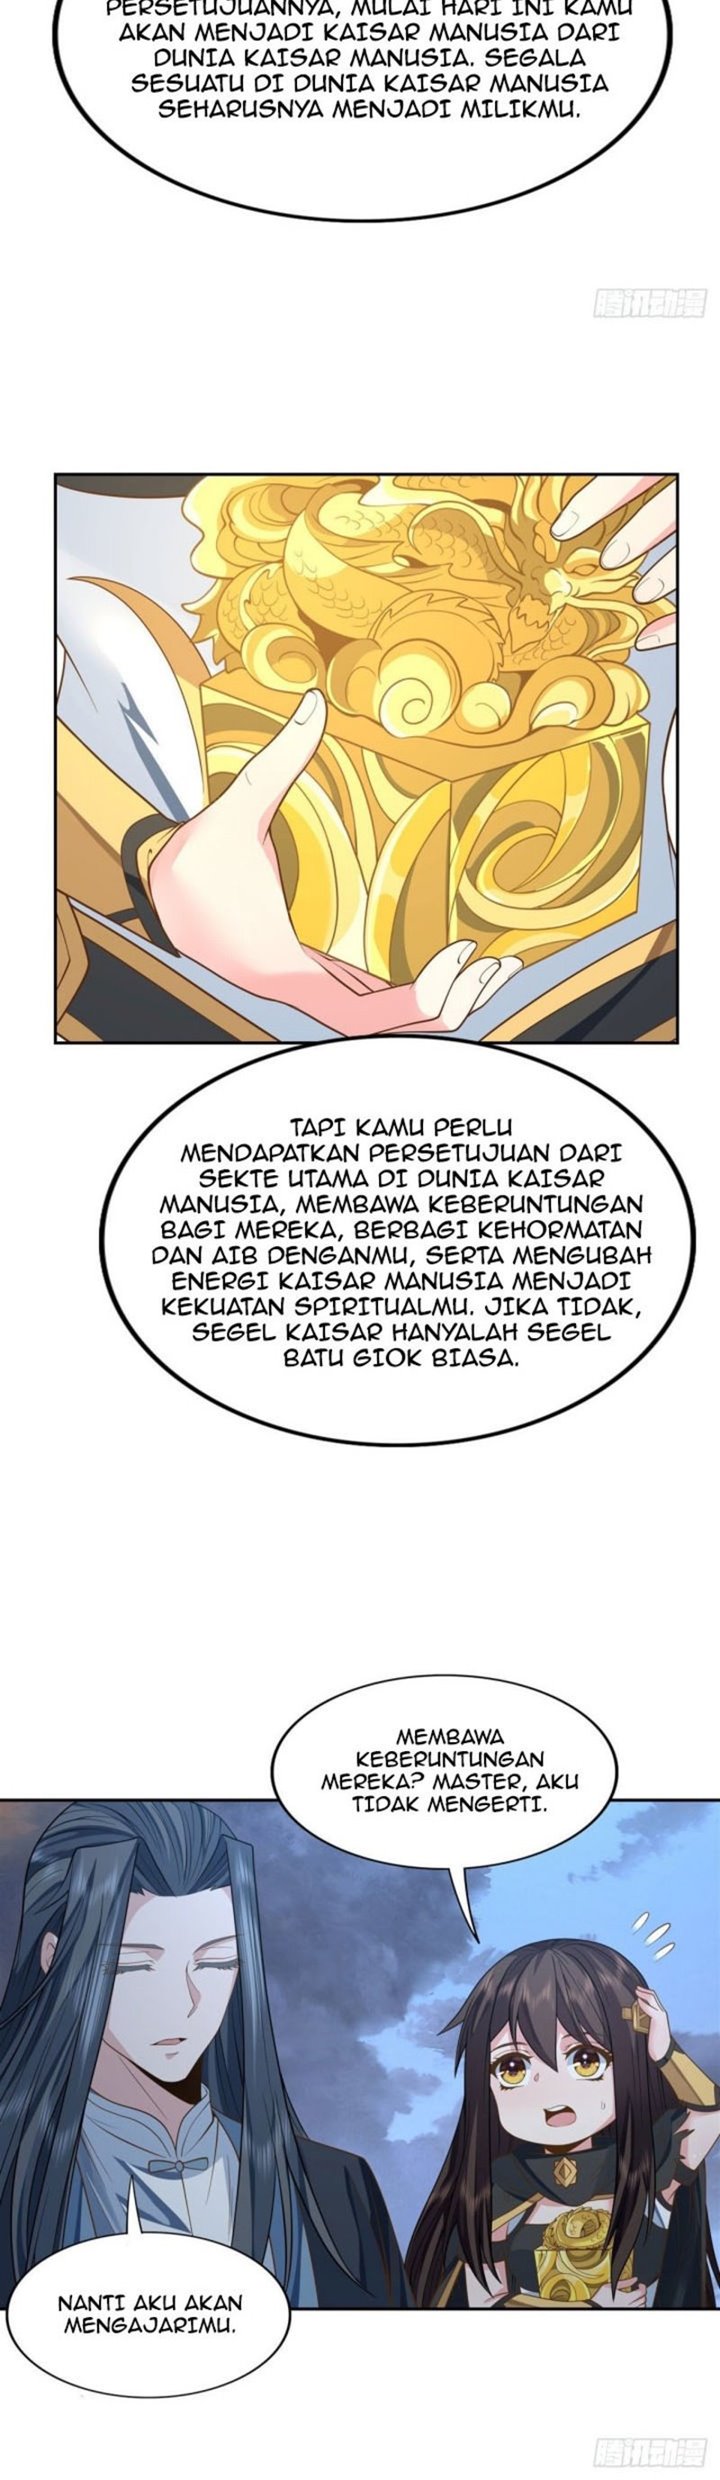 Dilarang COPAS - situs resmi www.mangacanblog.com - Komik my female apprentices are all big shots from the future 014 - chapter 14 15 Indonesia my female apprentices are all big shots from the future 014 - chapter 14 Terbaru 12|Baca Manga Komik Indonesia|Mangacan